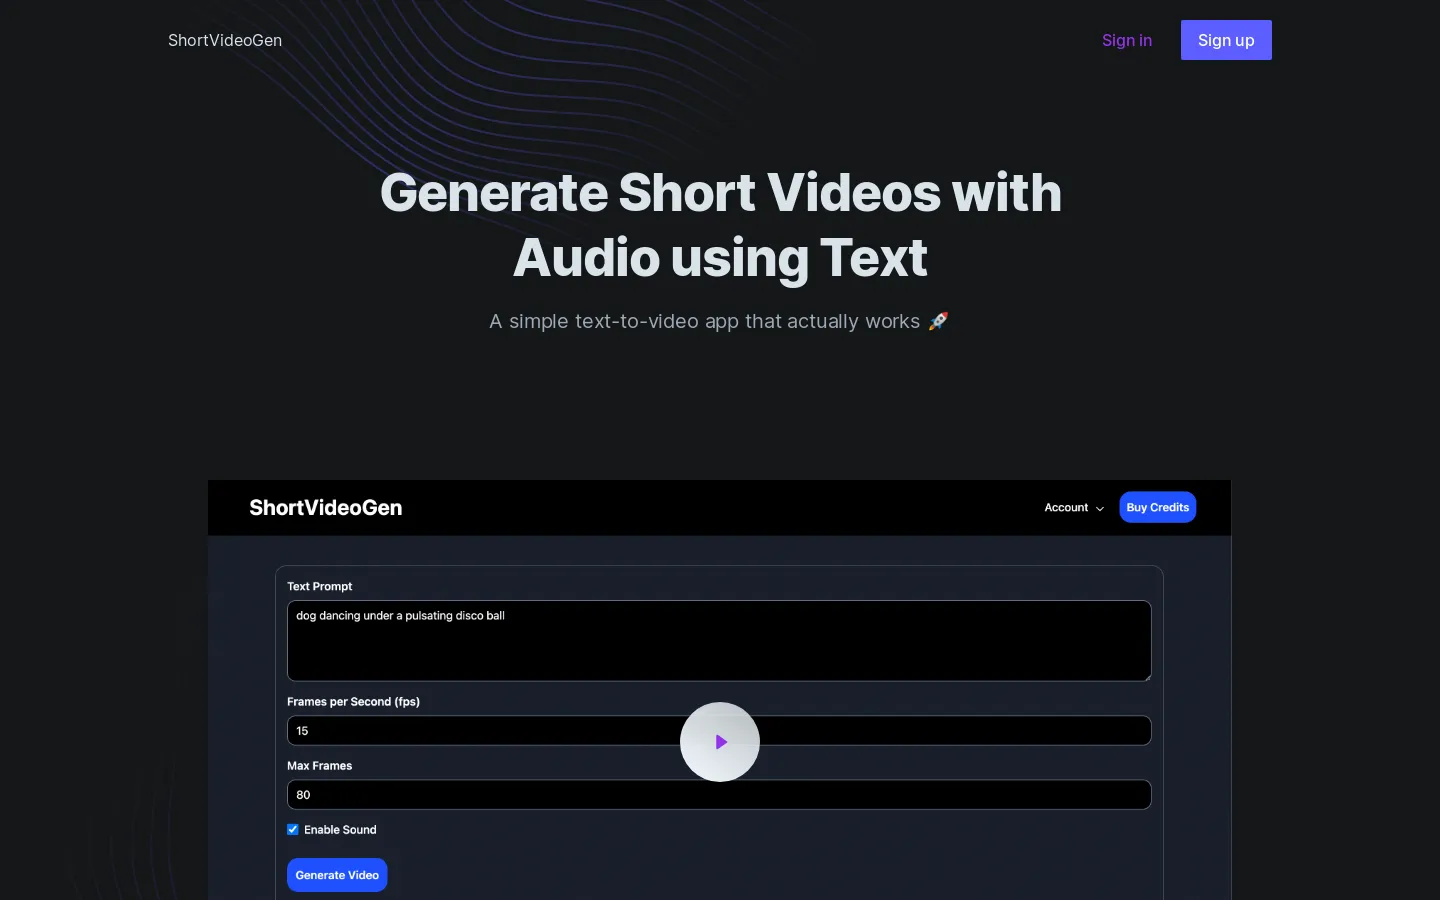 ShortVideoGen - Create Short Videos with Audio using Text